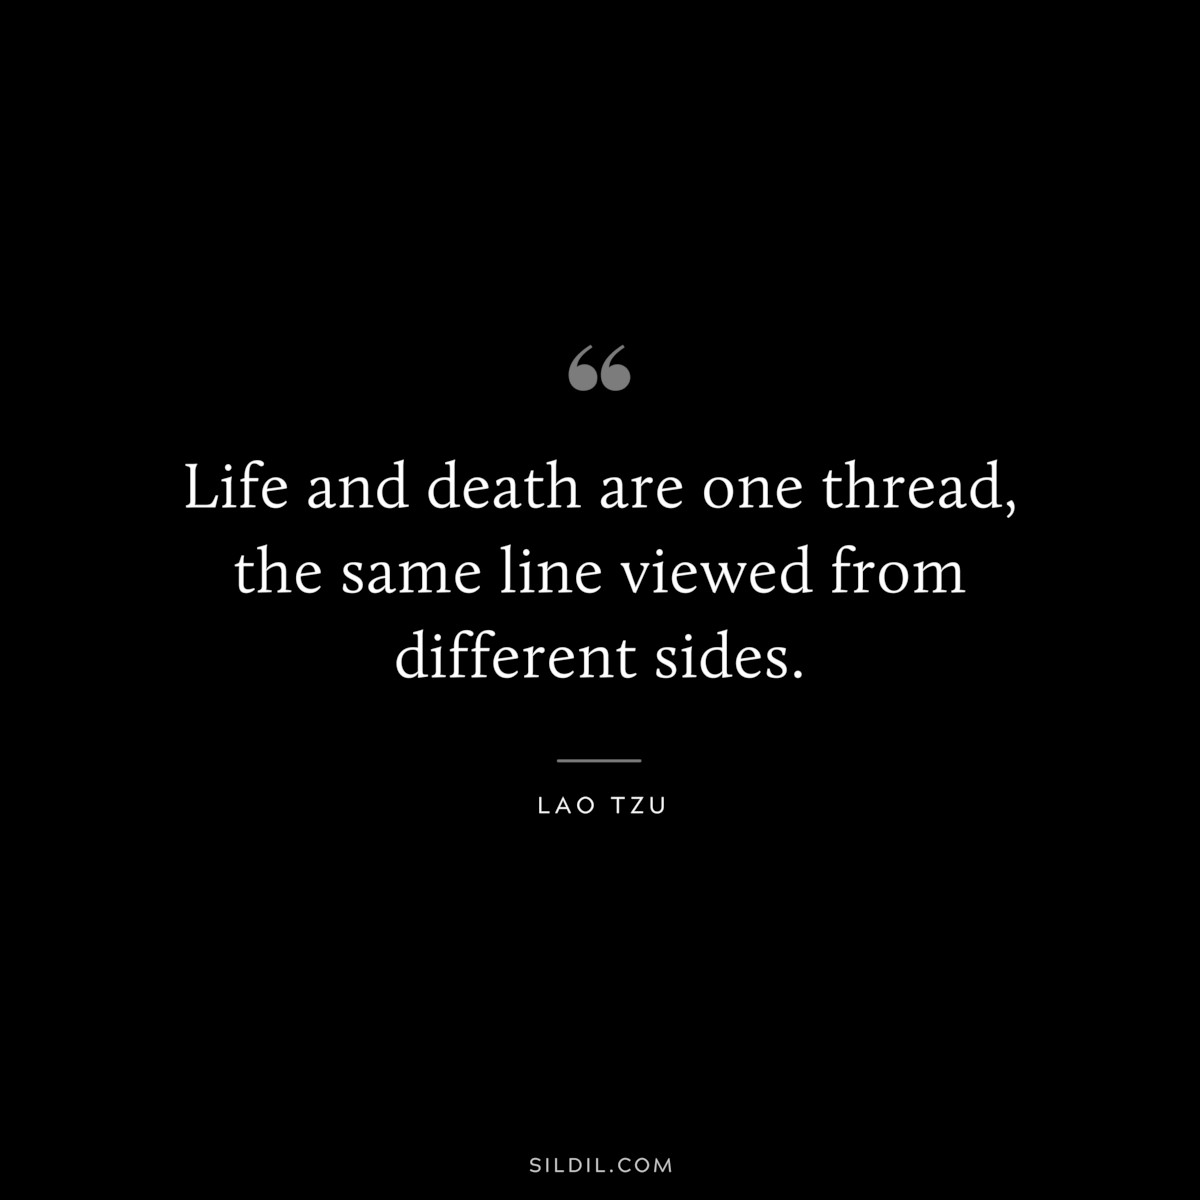 Life and death are one thread, the same line viewed from different sides. ― Lao Tzu